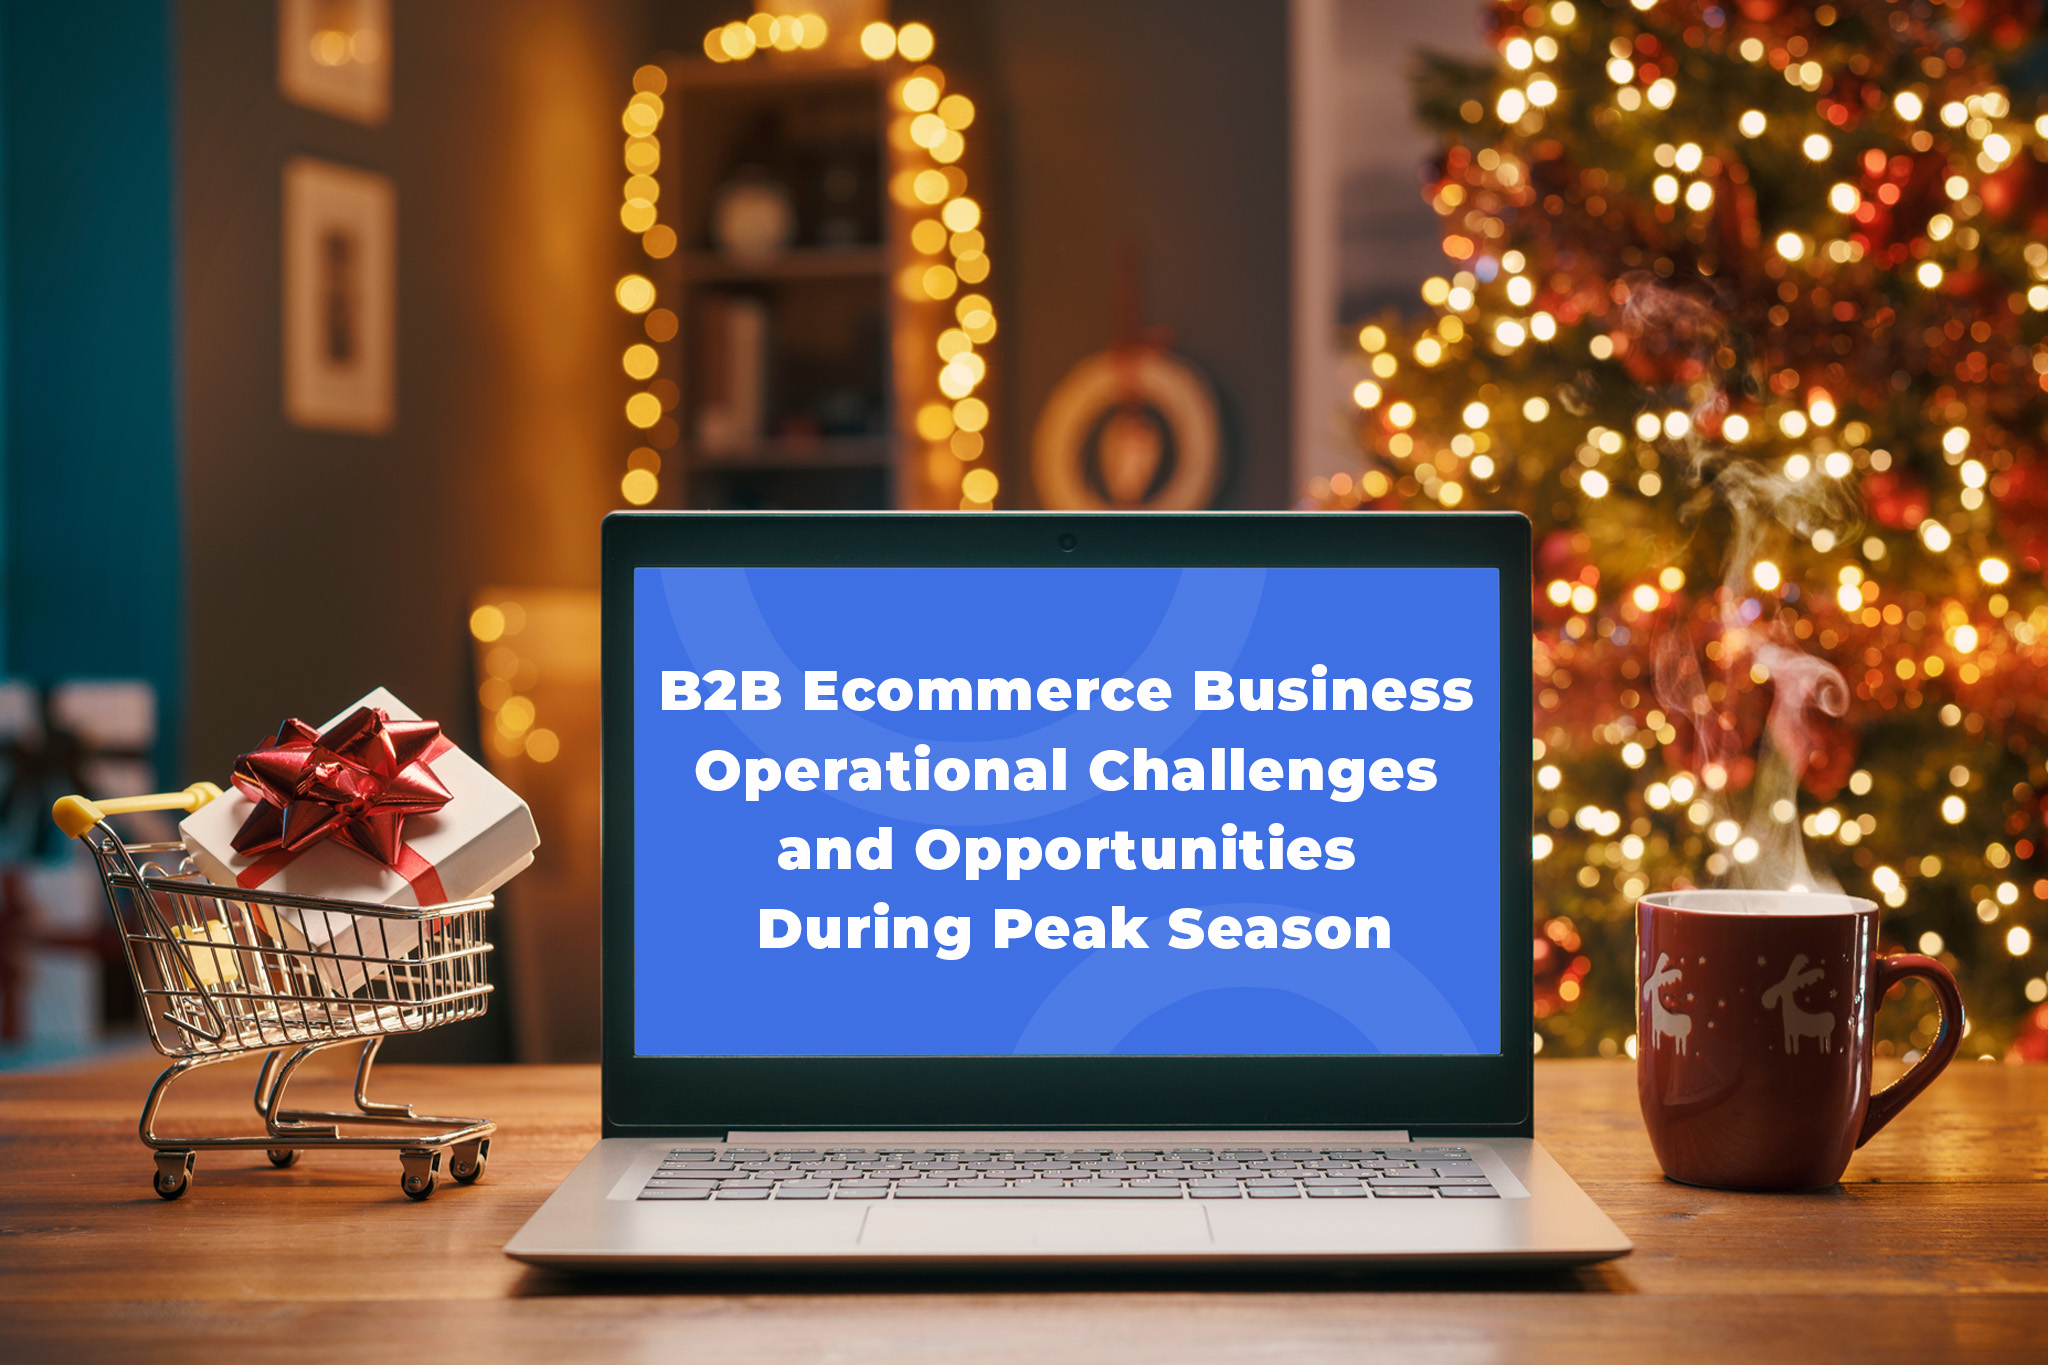 B2B ecommerce business operational challenges